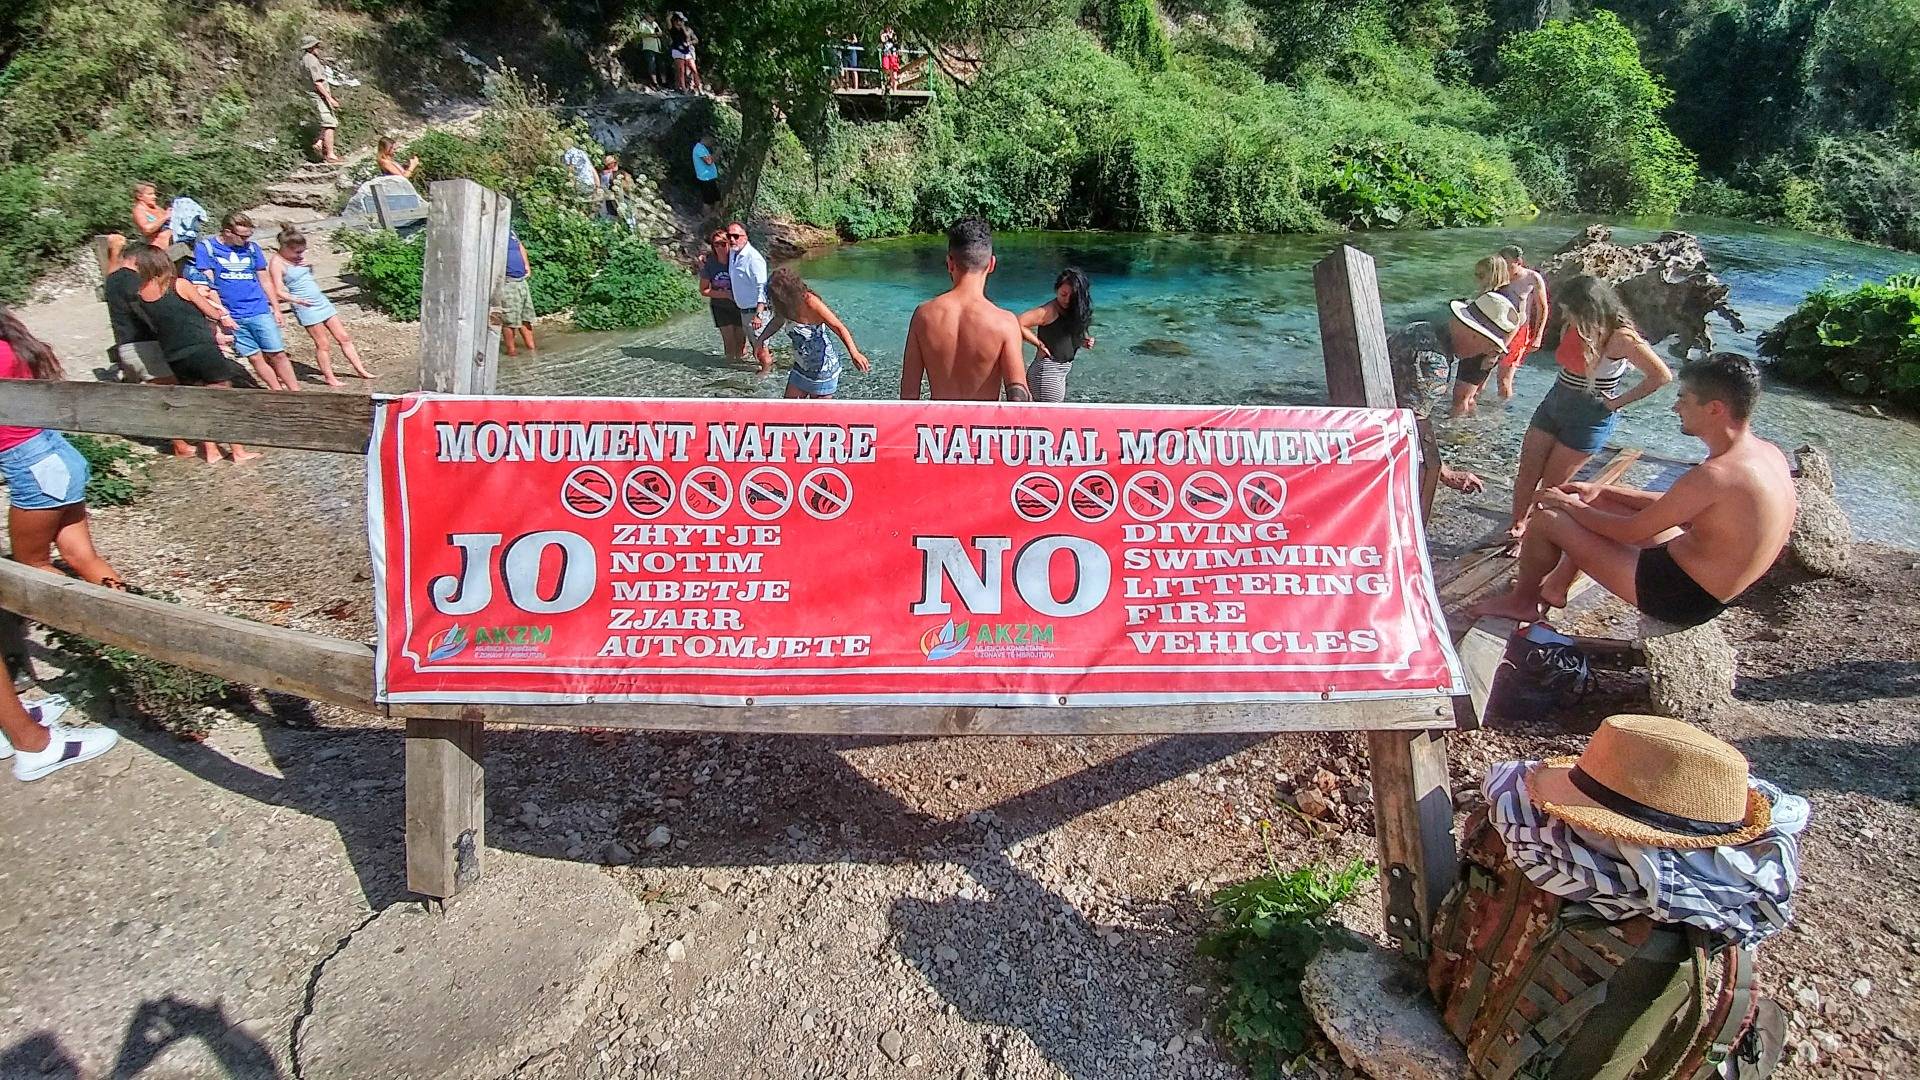 The natural monument sign with ”No swimming” warning